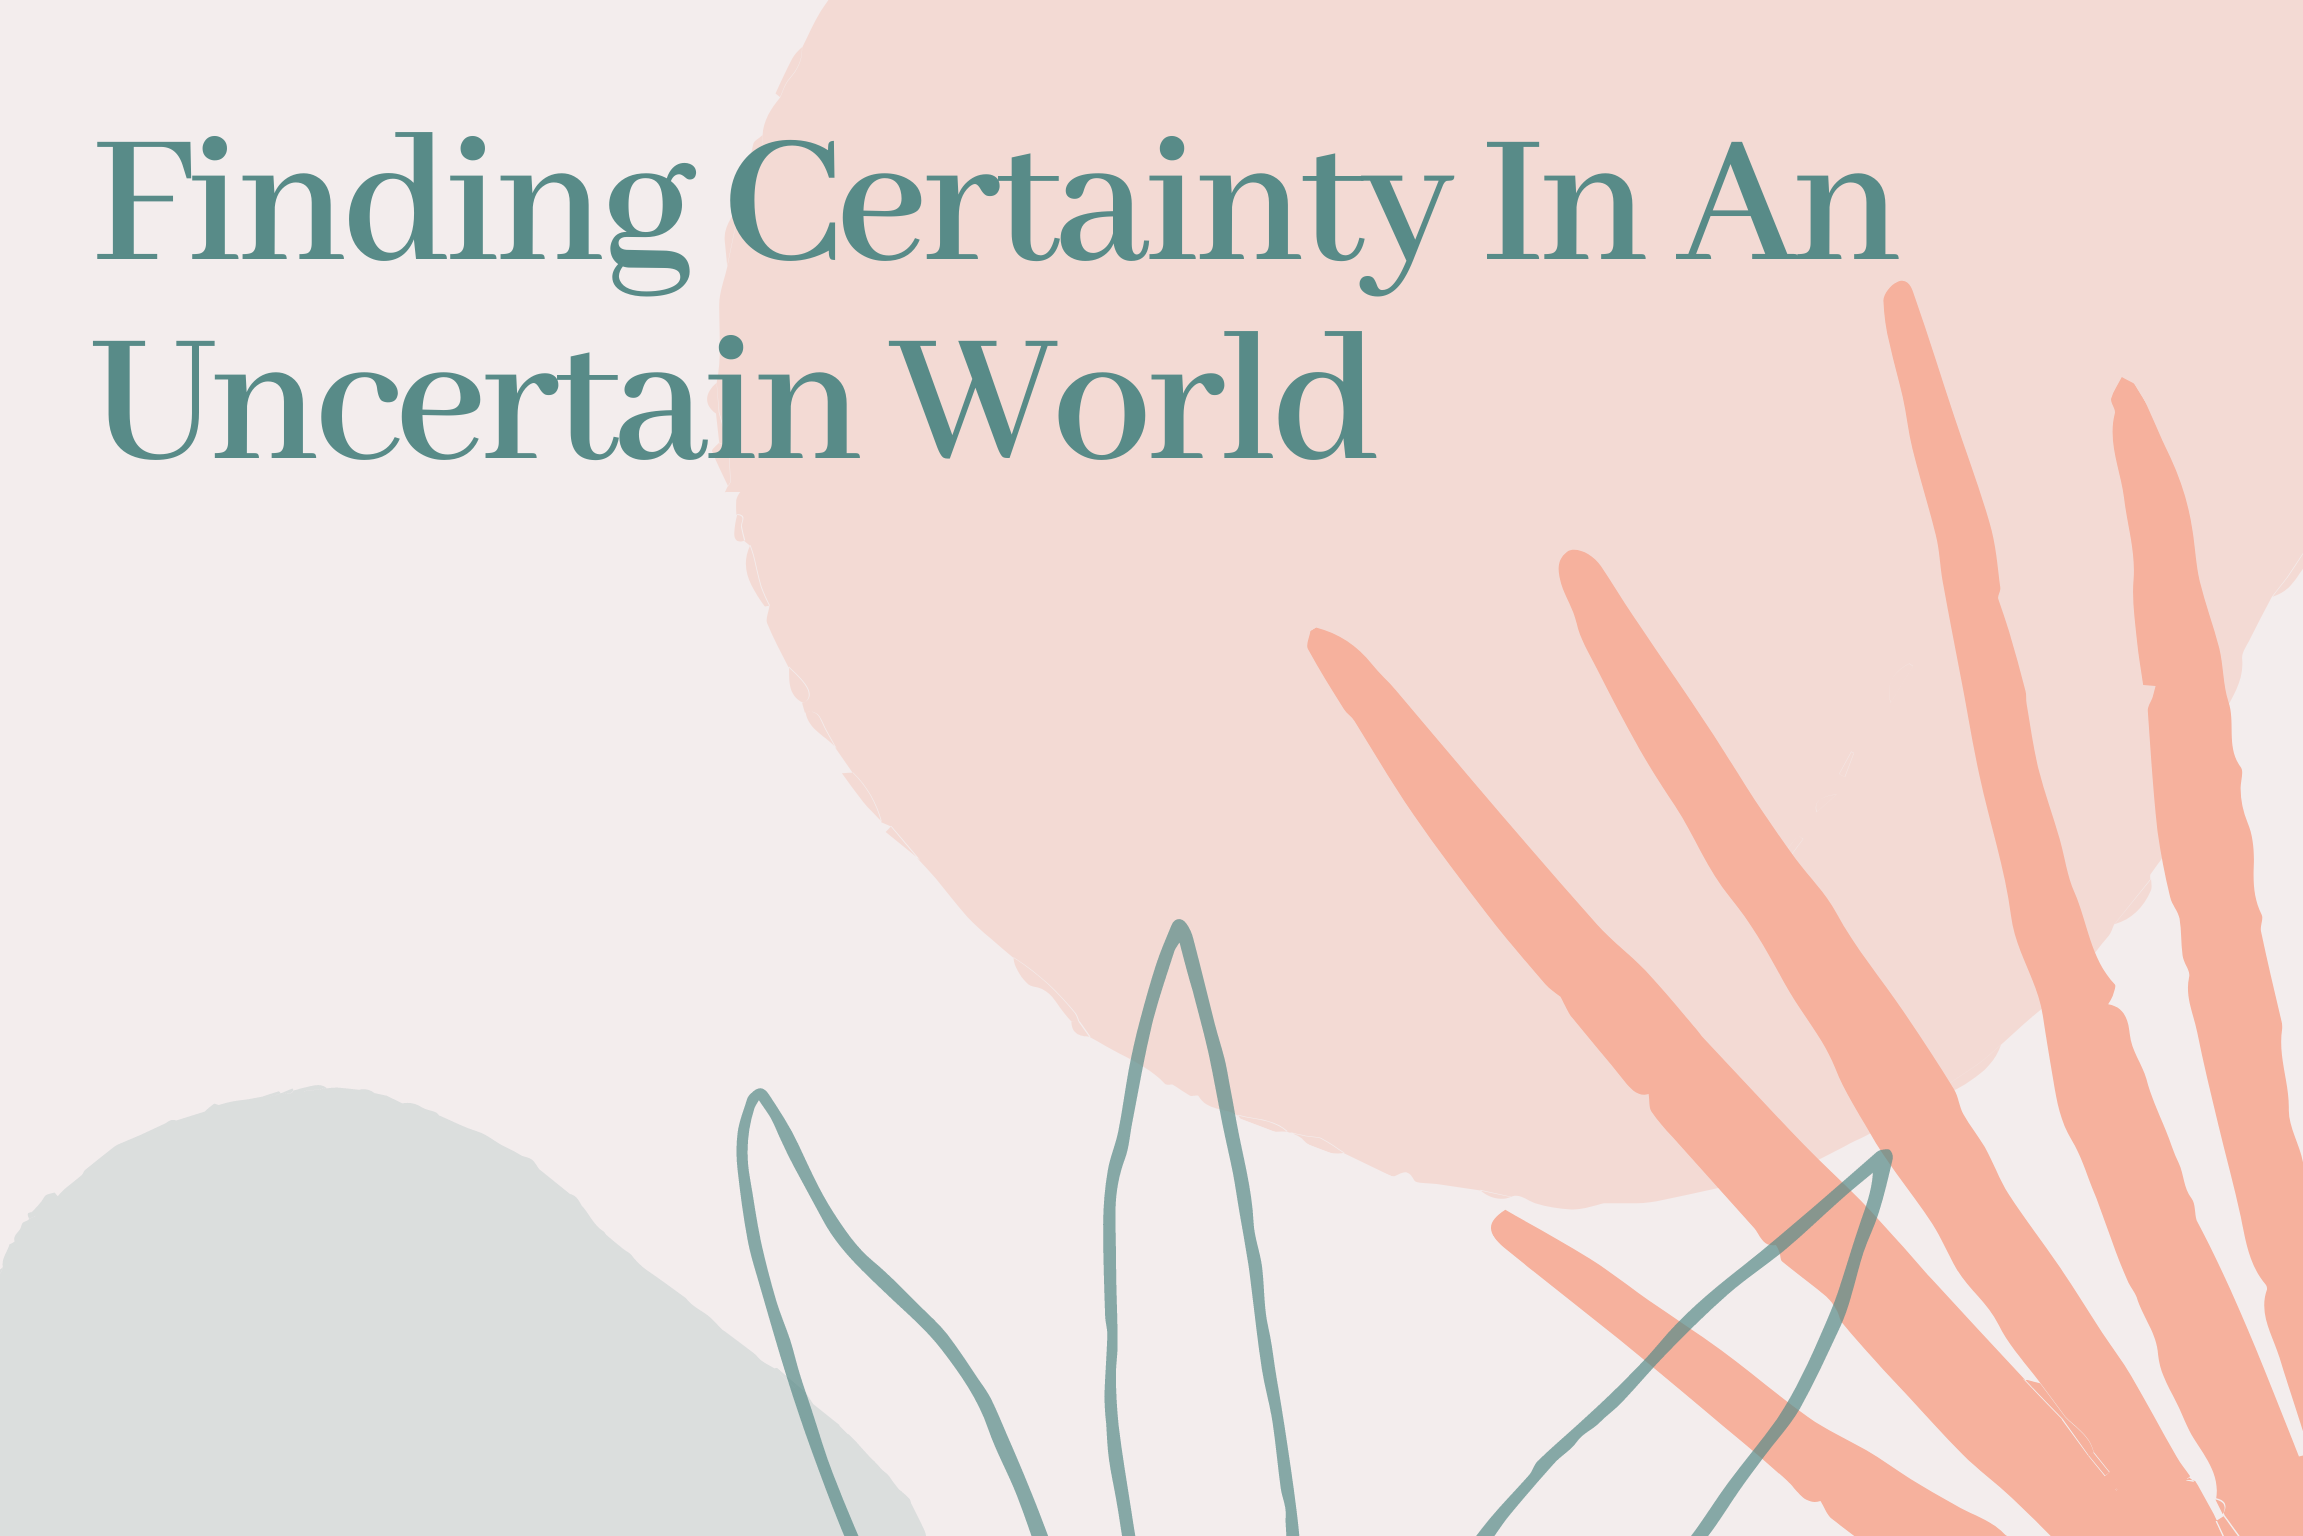 toothpaste | SiOWfa15: Science in Our World: Certainty and Controversy